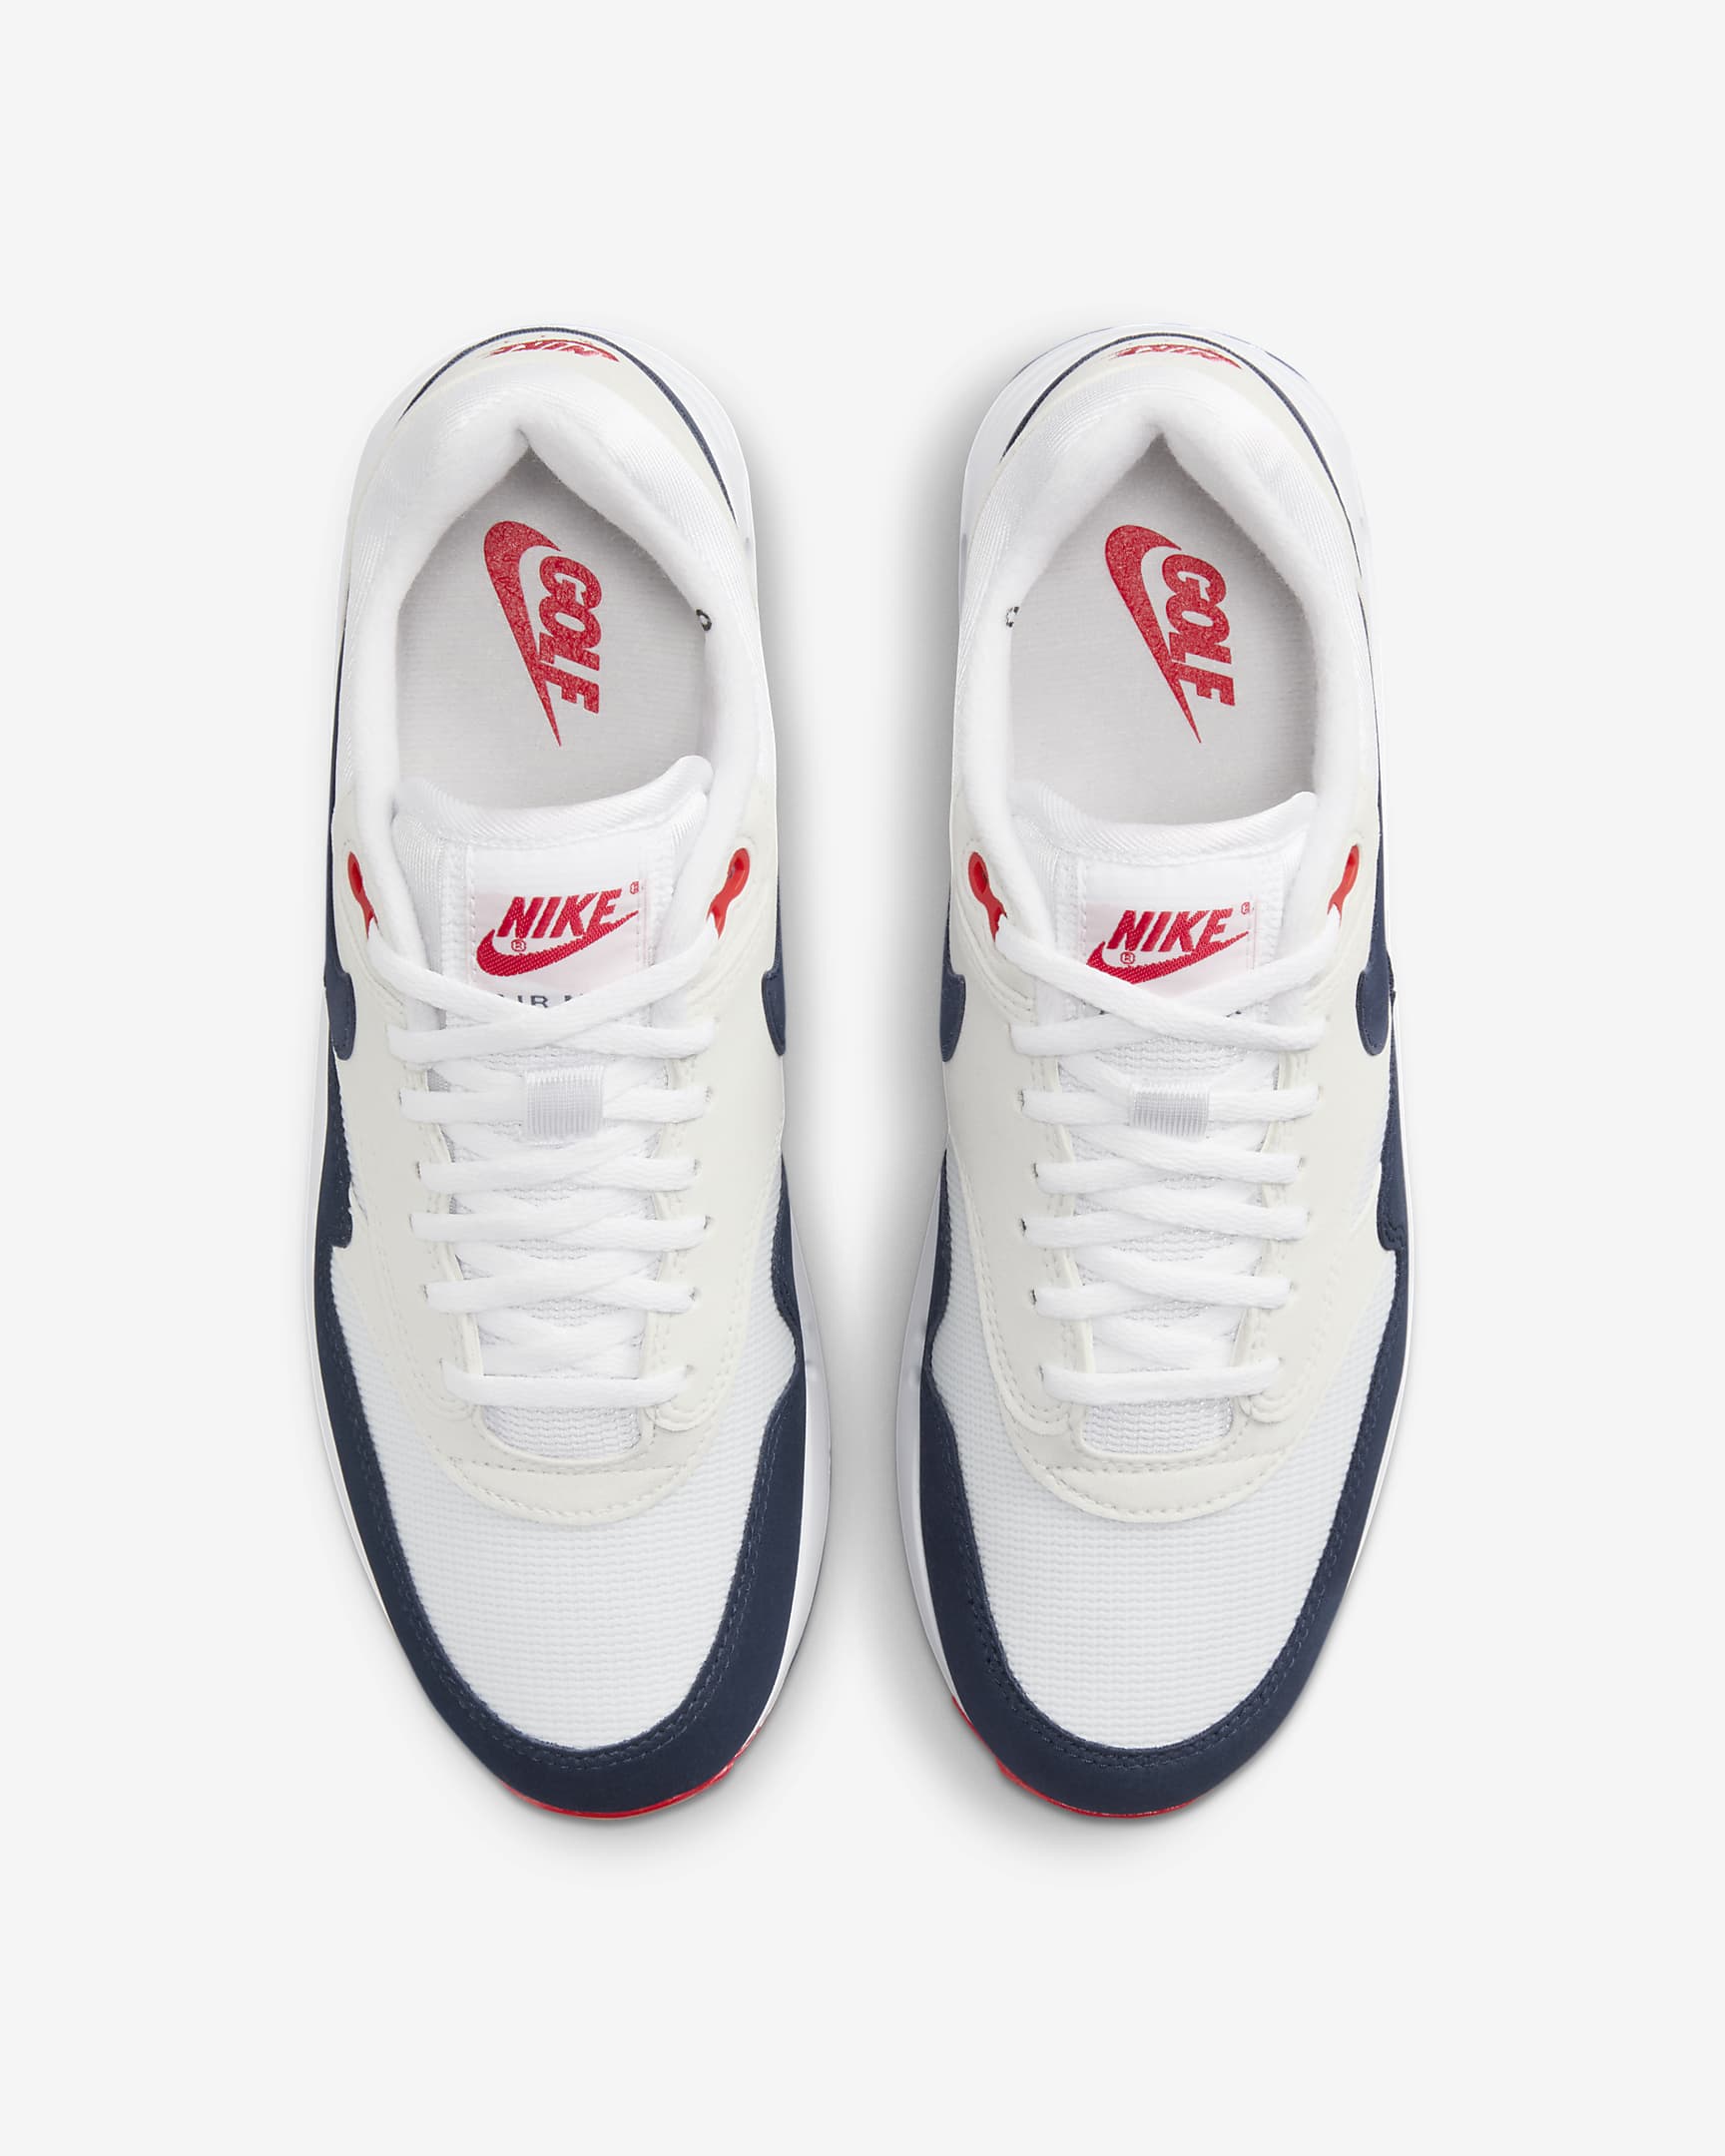 Game-Changer Alert: Nike Air Max 1 ’86 OG G Men’s Golf Shoes Reviewed and Rated!